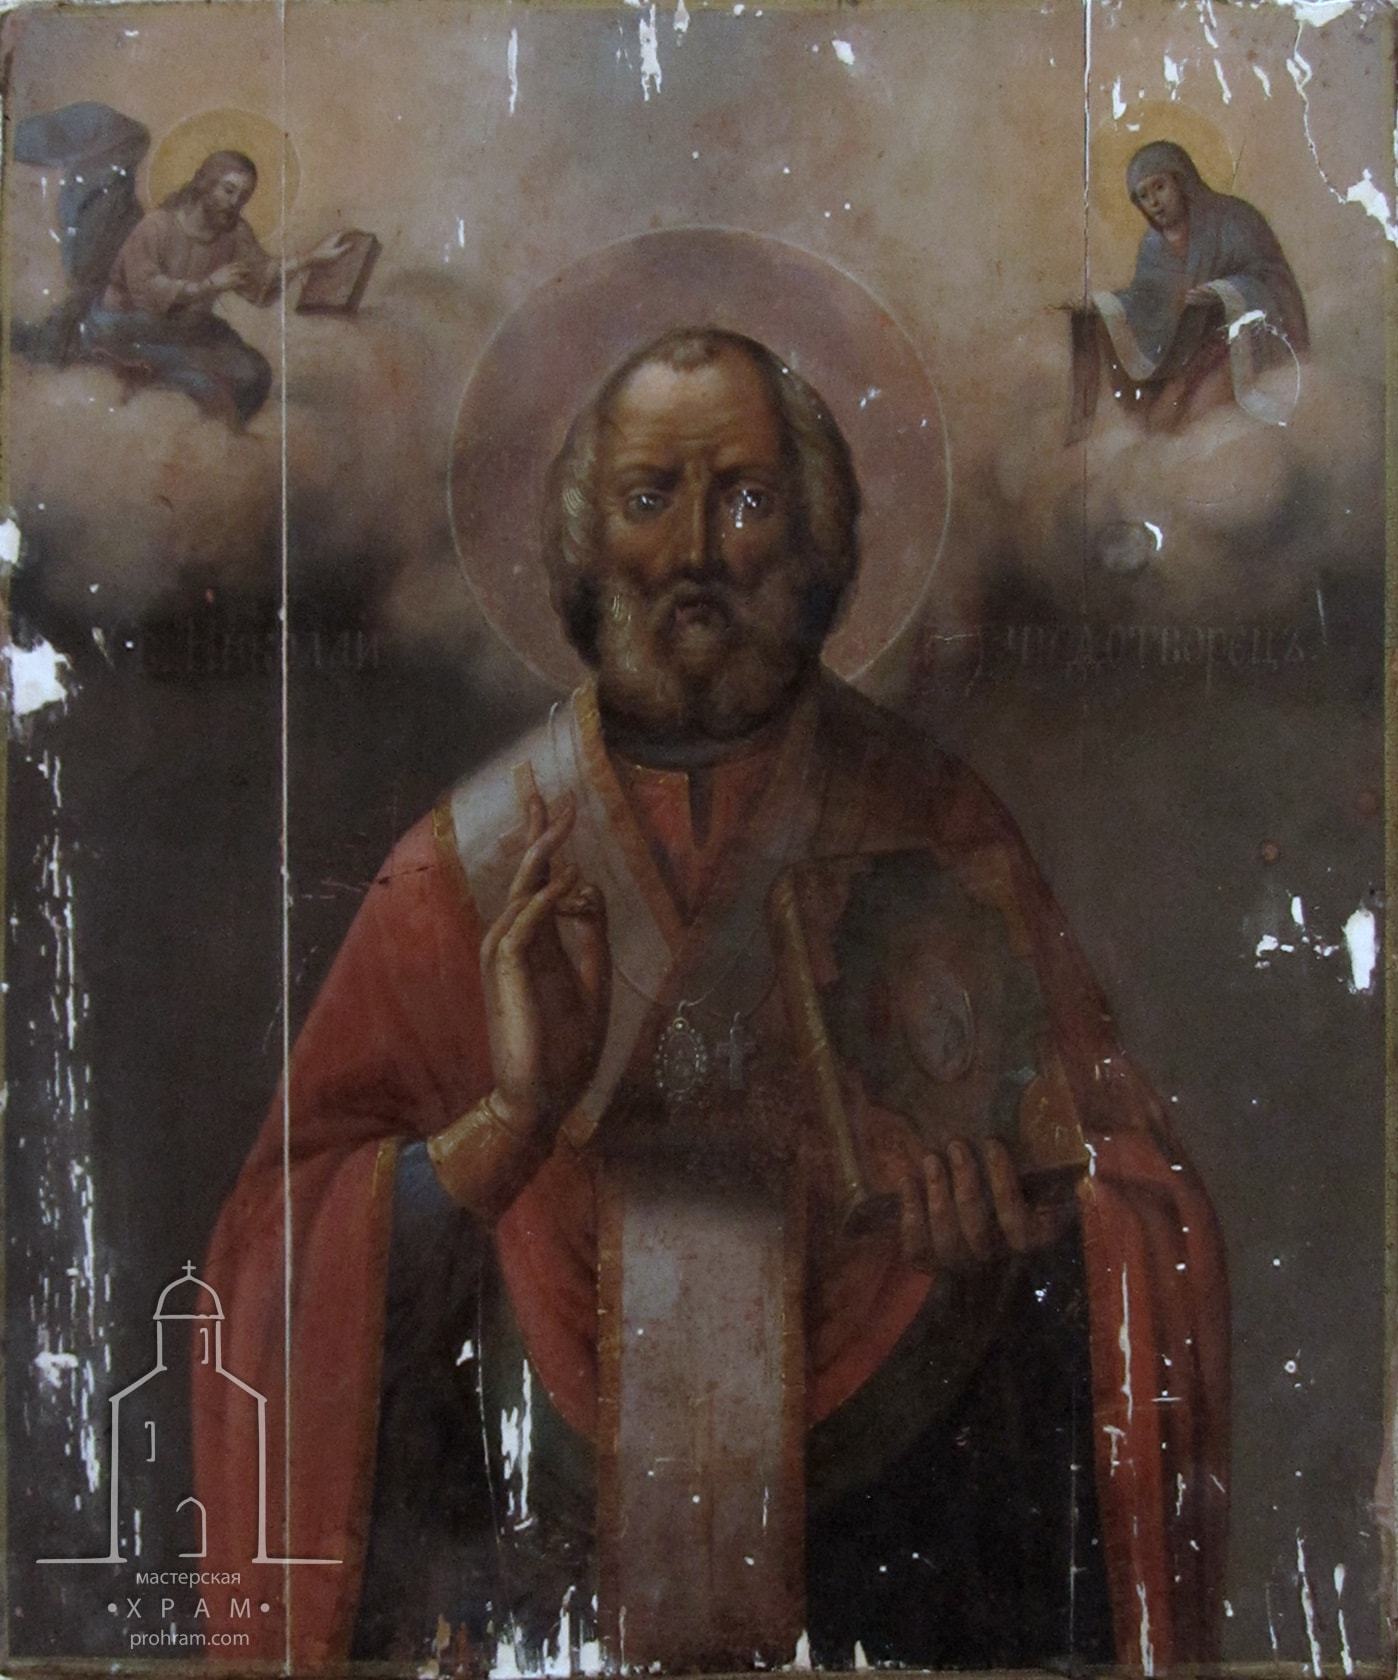 restoration, restoration of icons, restoration of icons stages, Icon of St. Nicholas the Wonderworker, early 20th century.